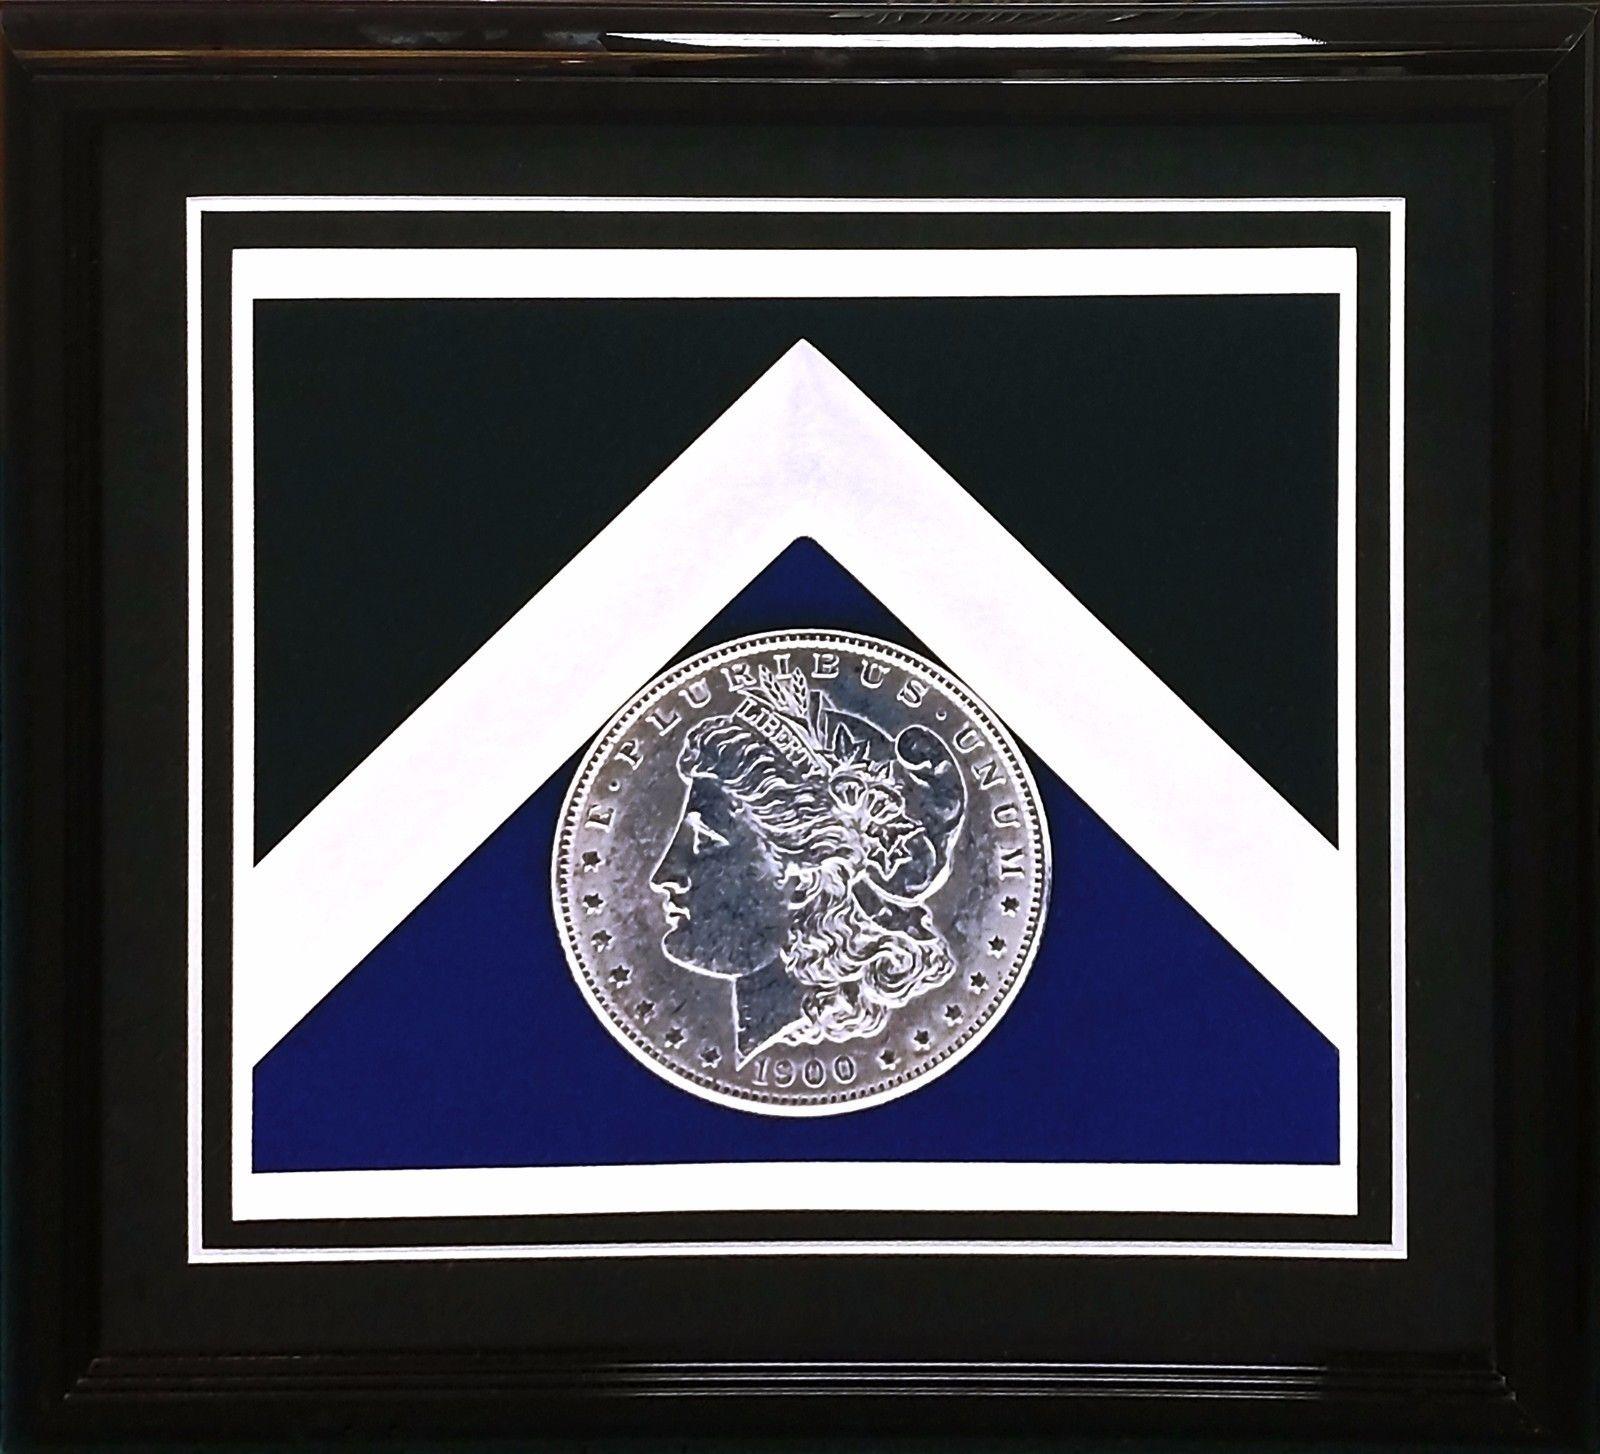 SILVER DOLLAR (COLOR) - Photograph by Robert Mapplethorpe